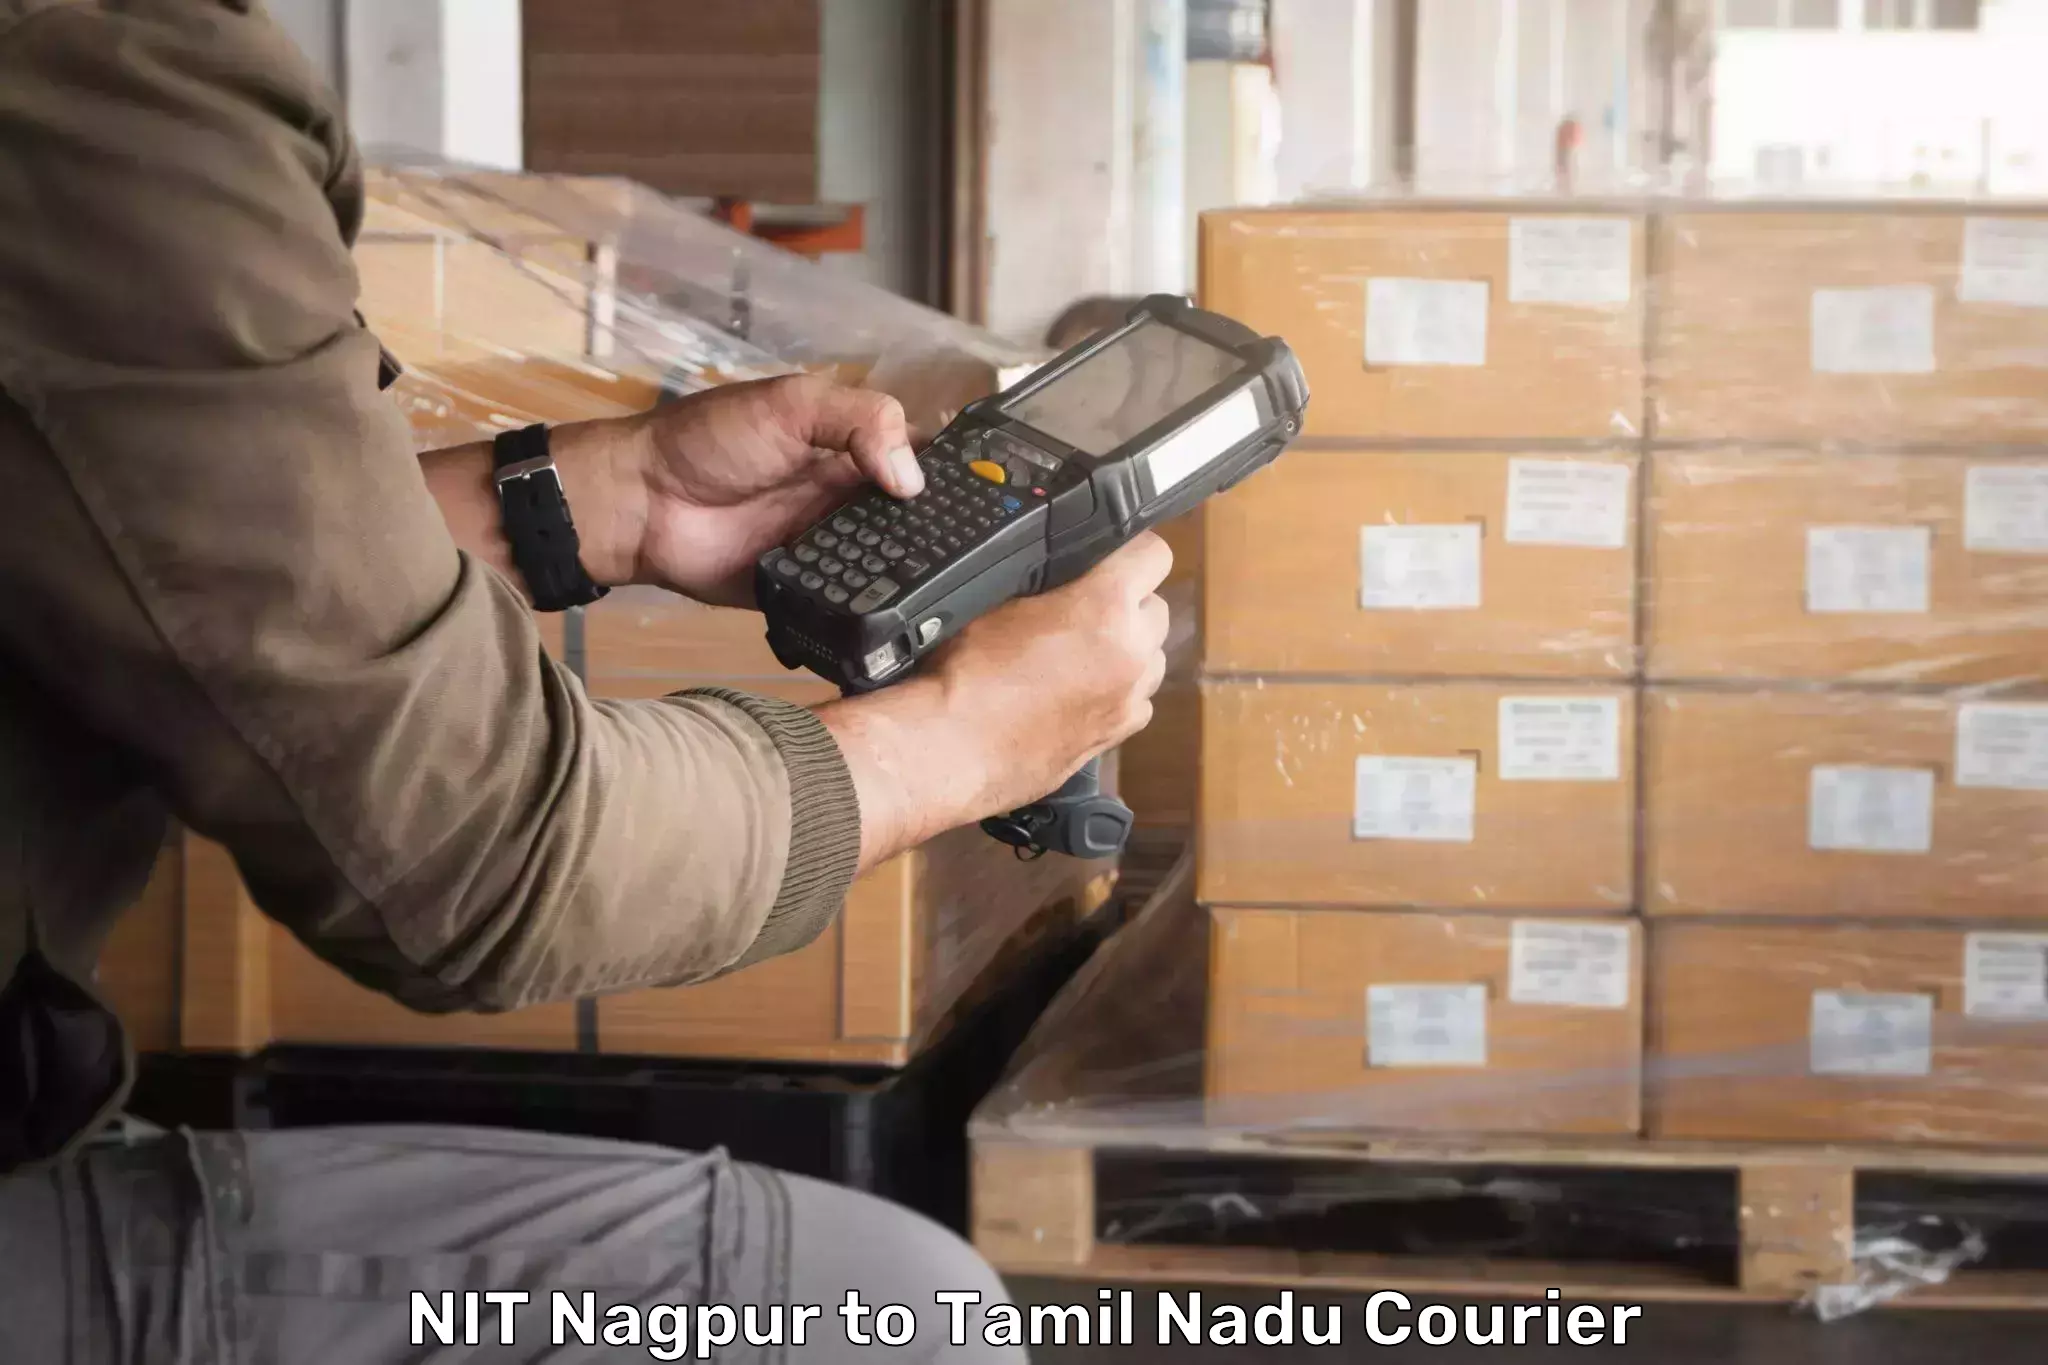 Premium courier solutions NIT Nagpur to Thisayanvilai